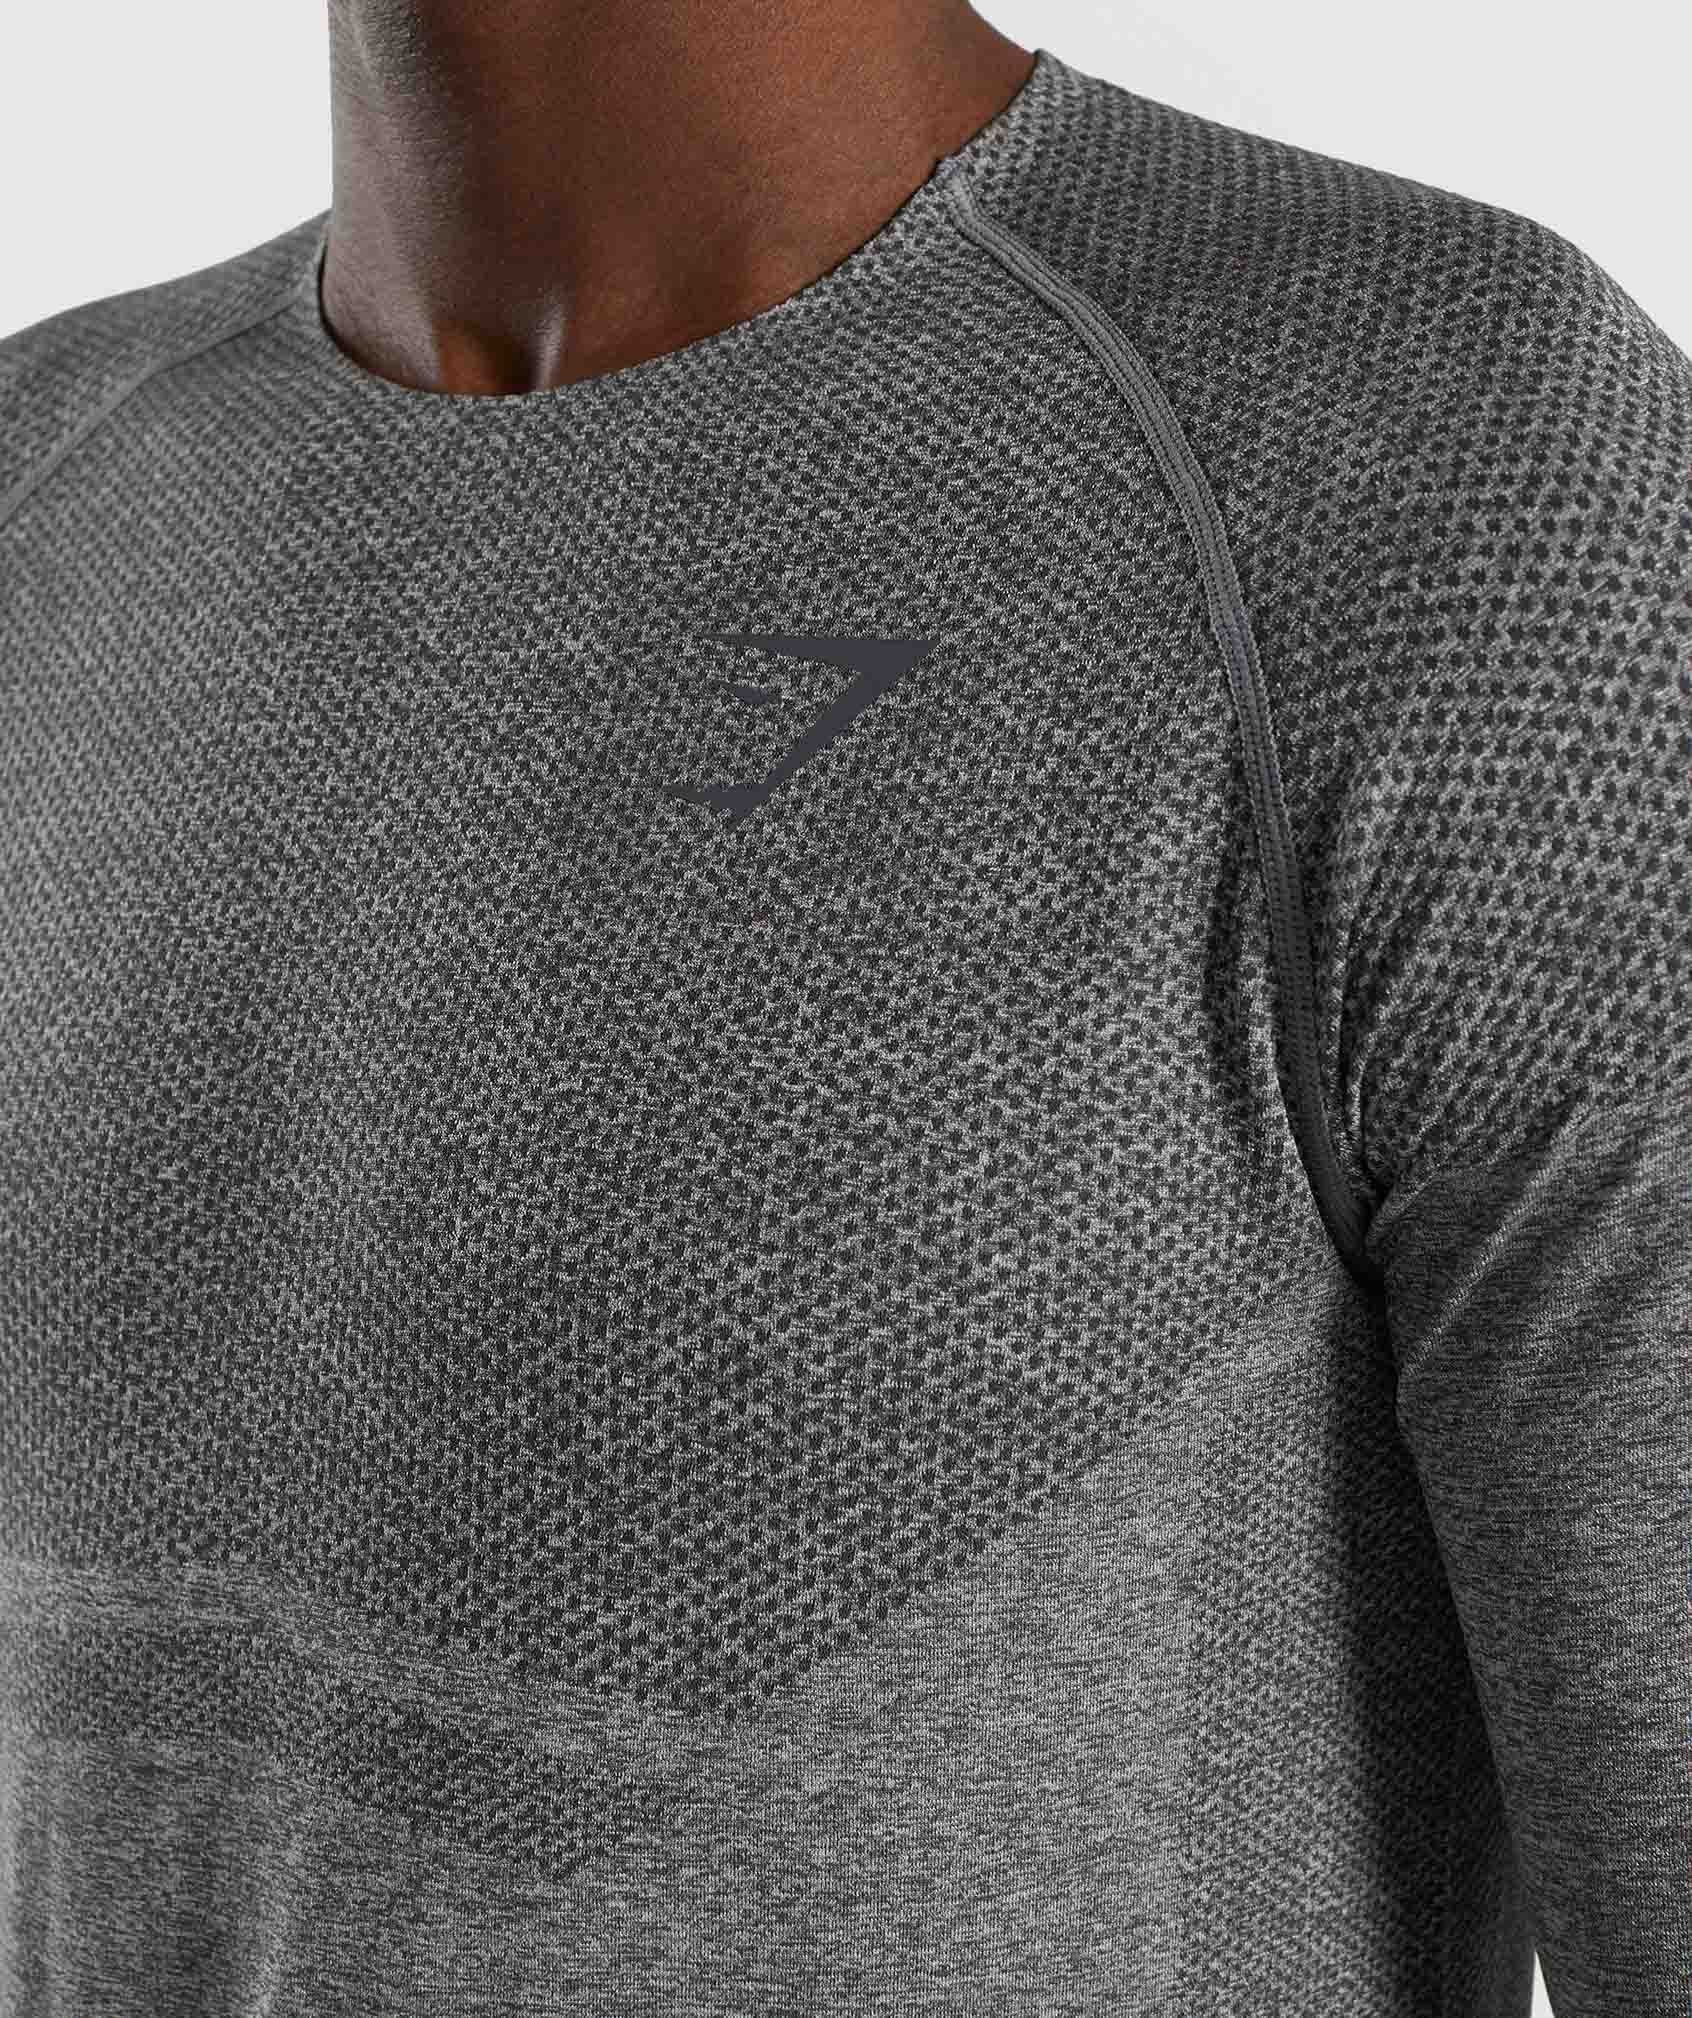 Shadow X Seamless Long Sleeve T-Shirt in Charcoal Marl - view 6